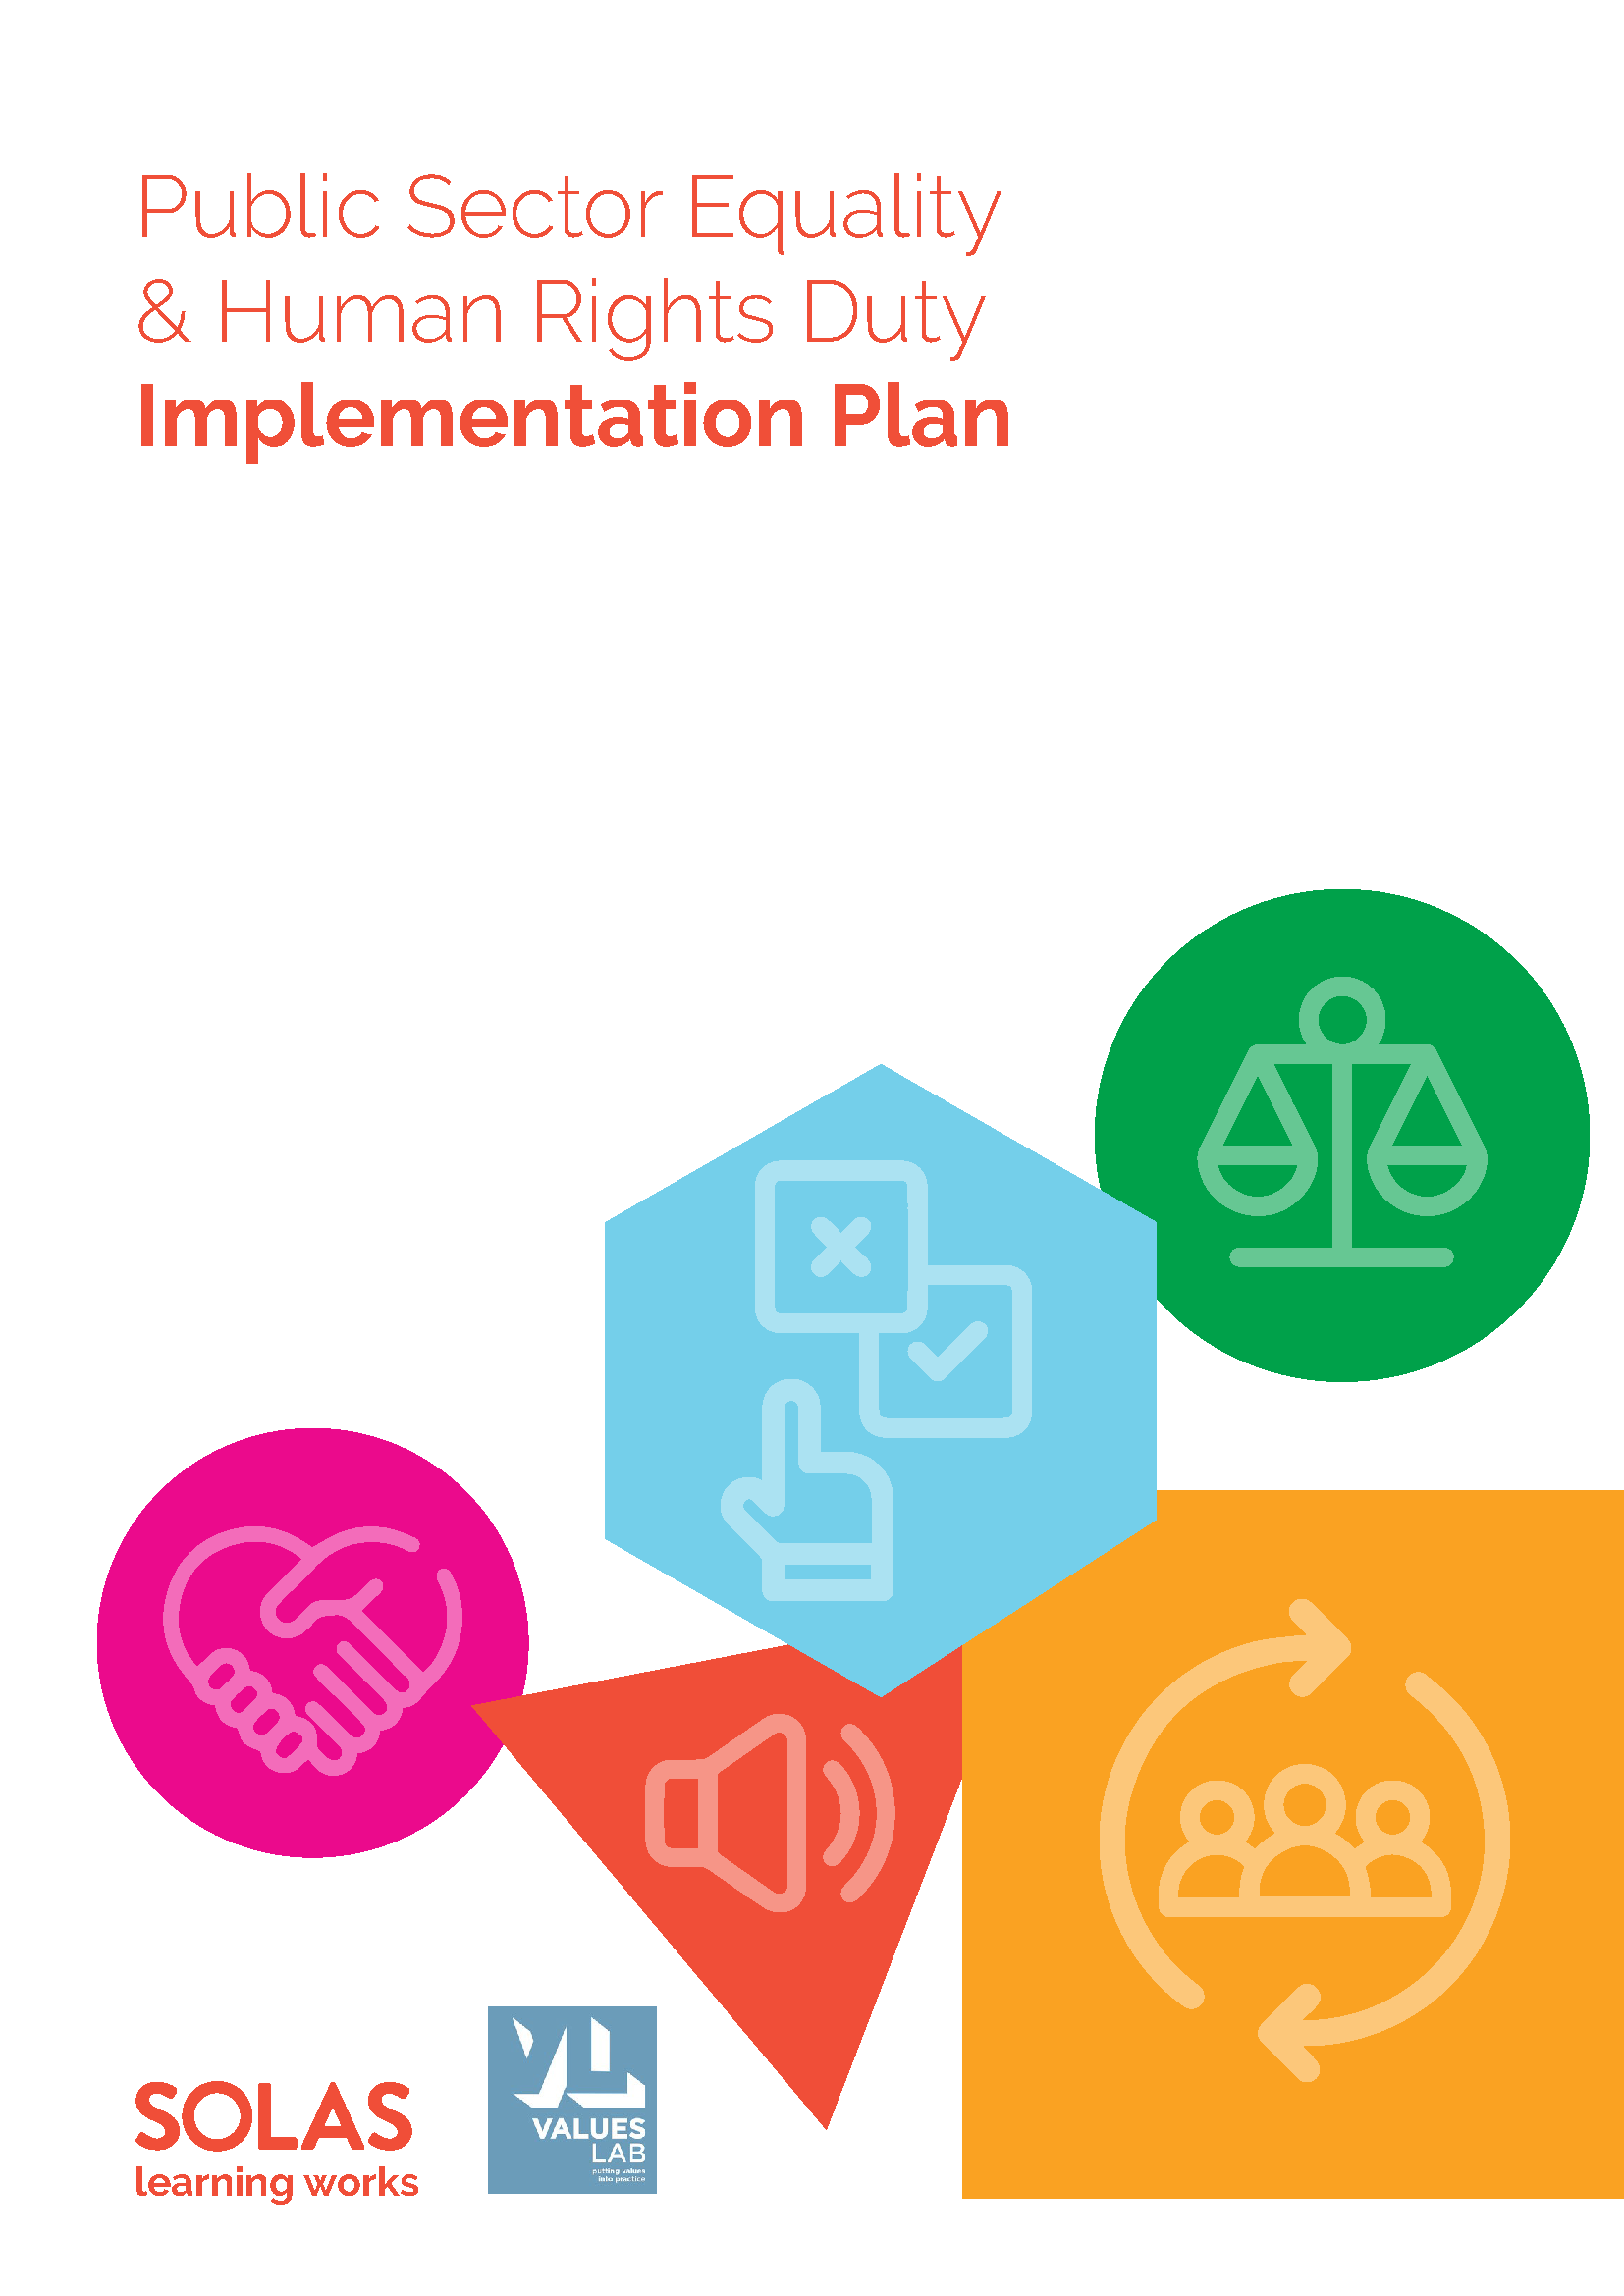 Public Sector Equality & Human Rights Duty Implementation Plan